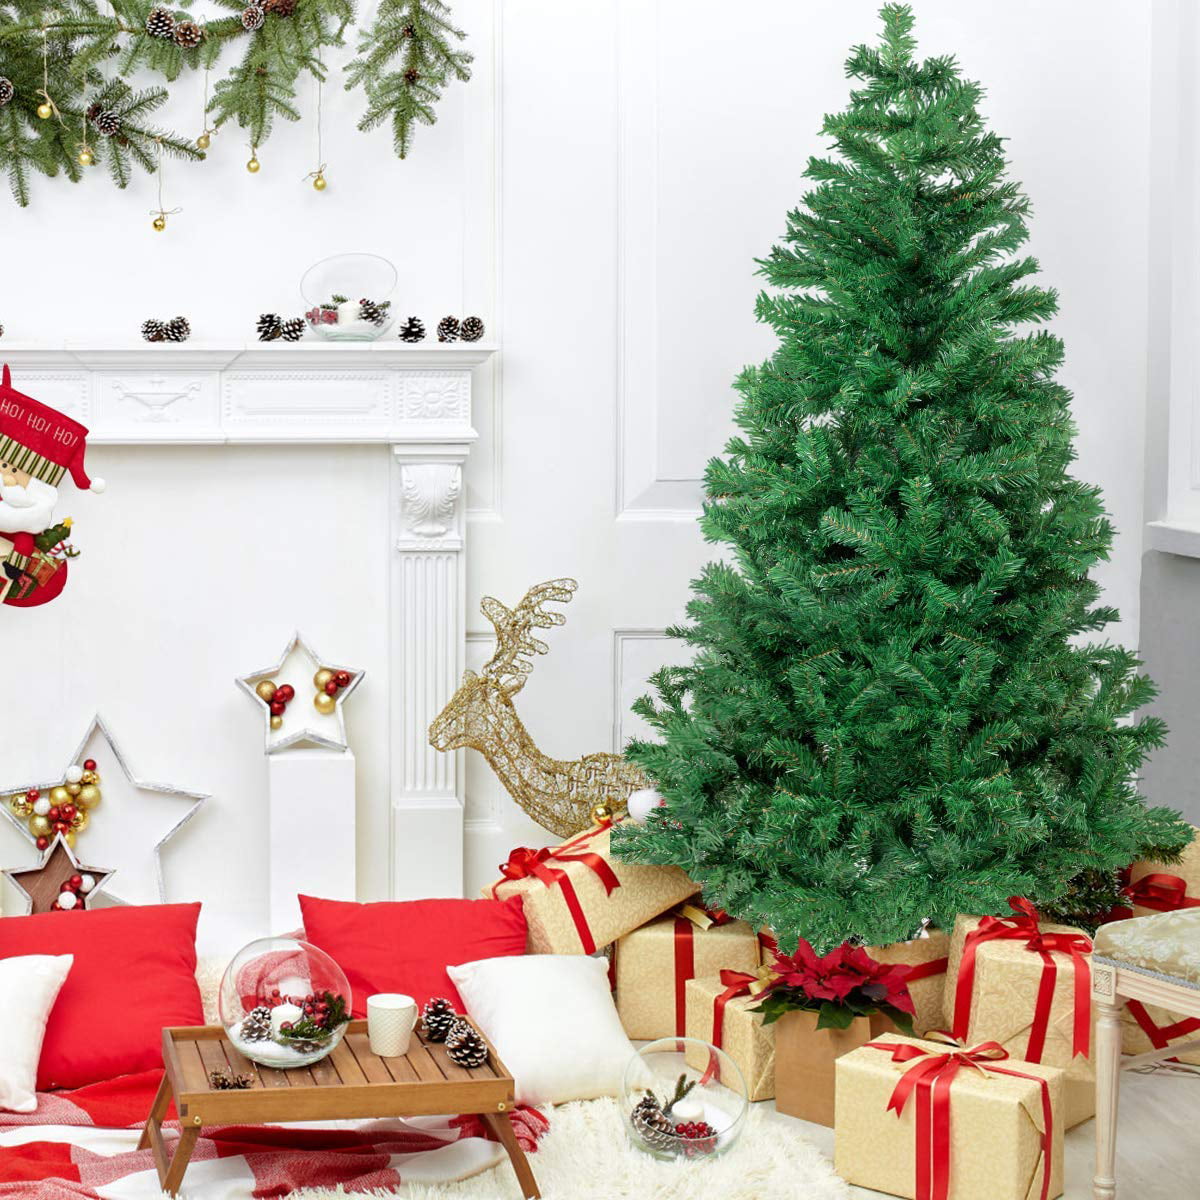 Modern Decorating Christmas Tree with Simple Decor